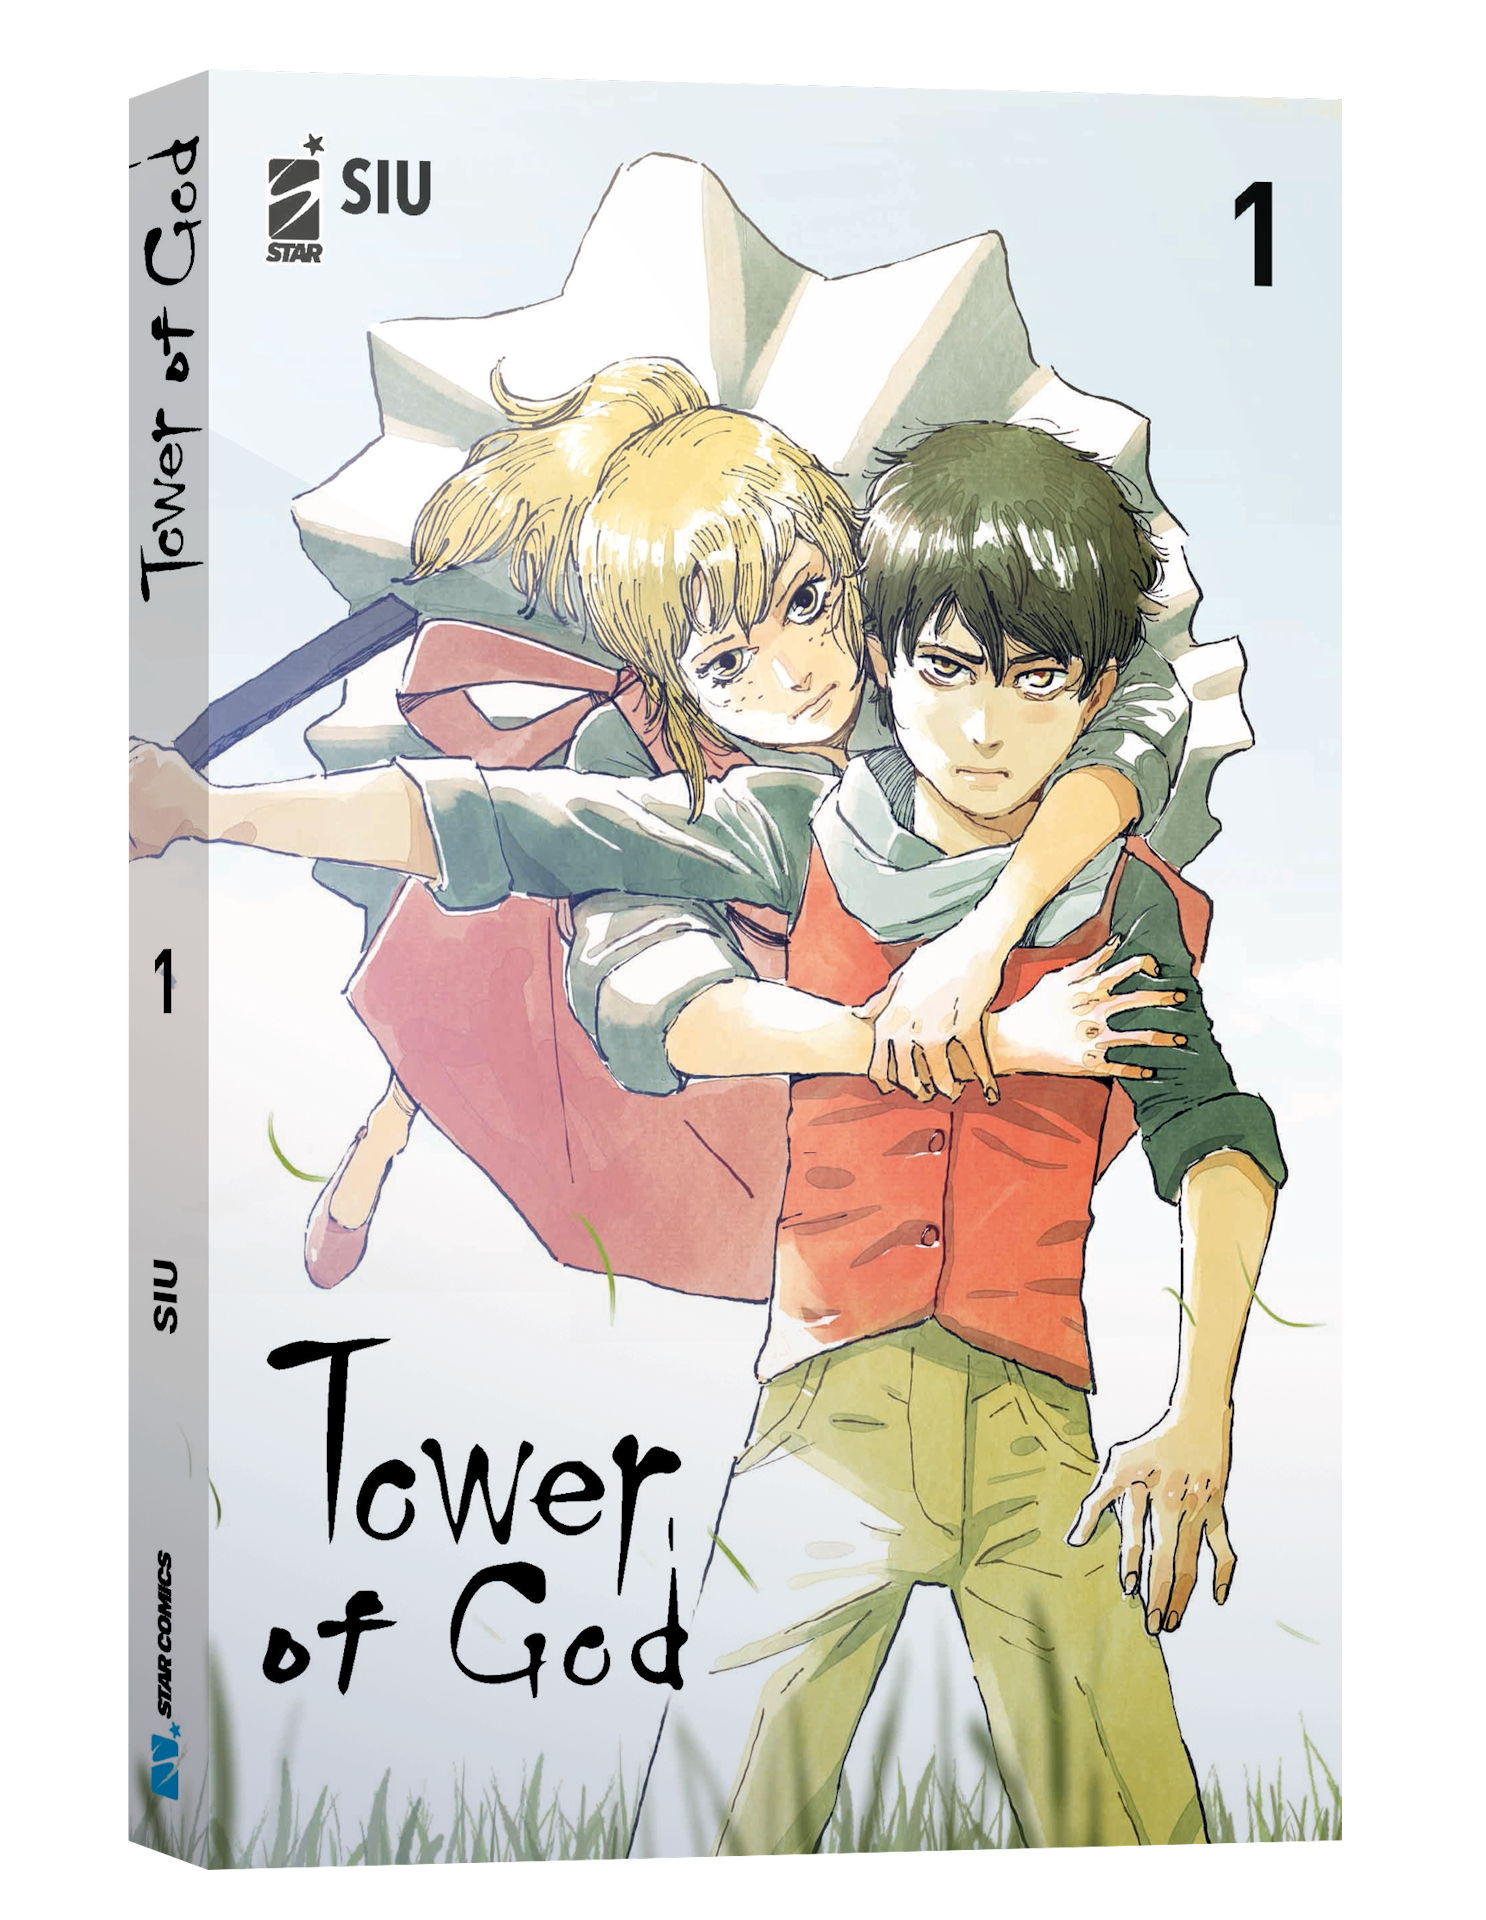 Tower of God N. 1 Variant Cover Edition by Giacomo Bevilacqua